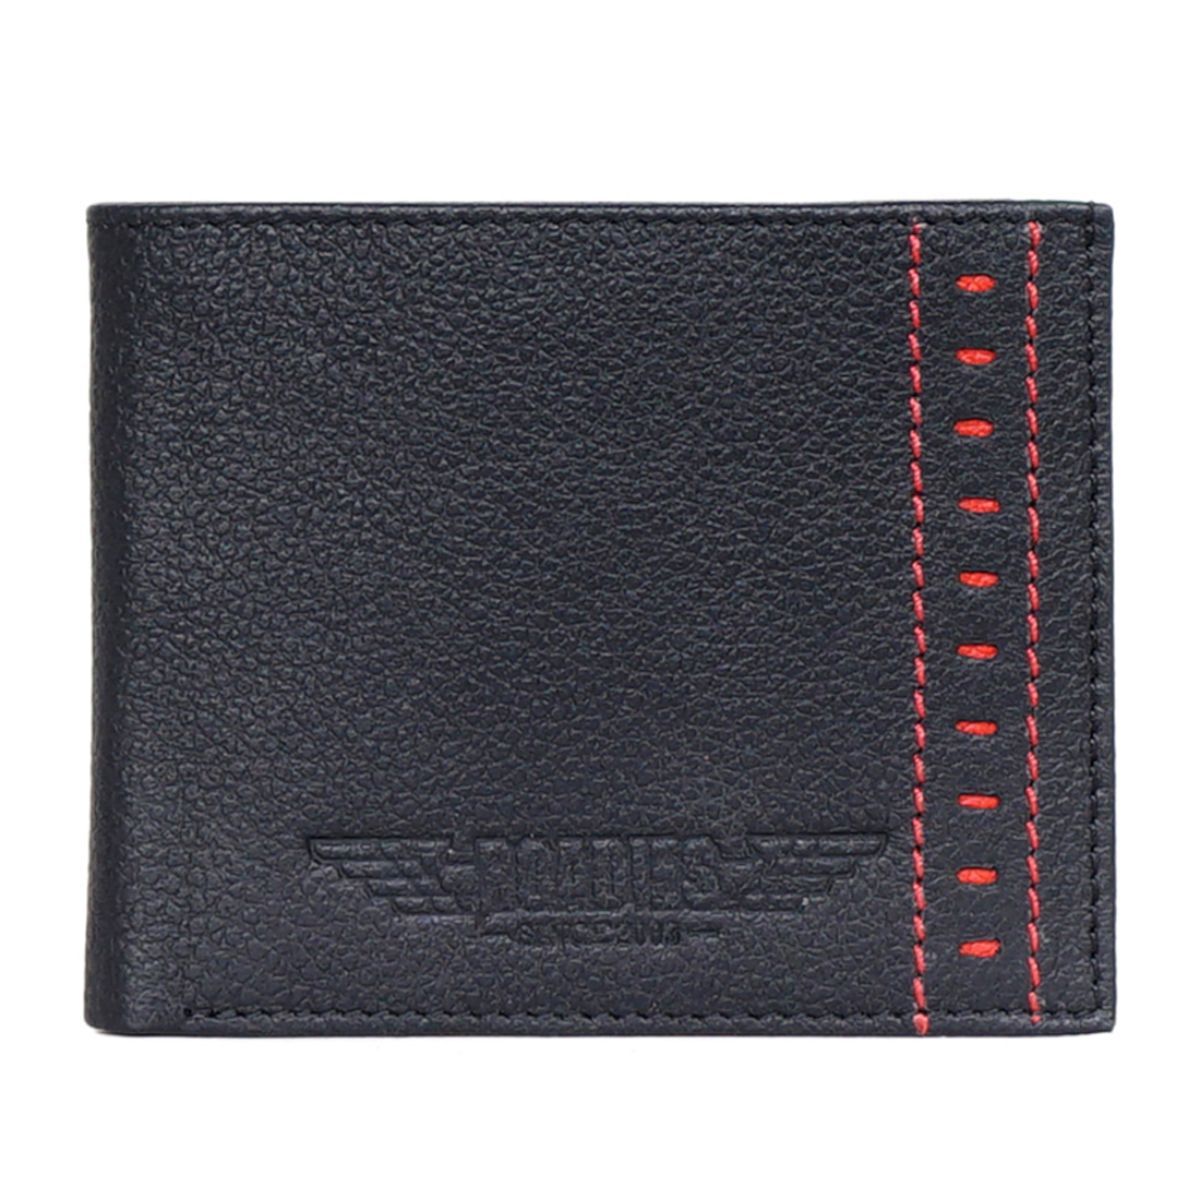 Justanned Roadies By "Sauve In Red' Men'S Leather Wallet